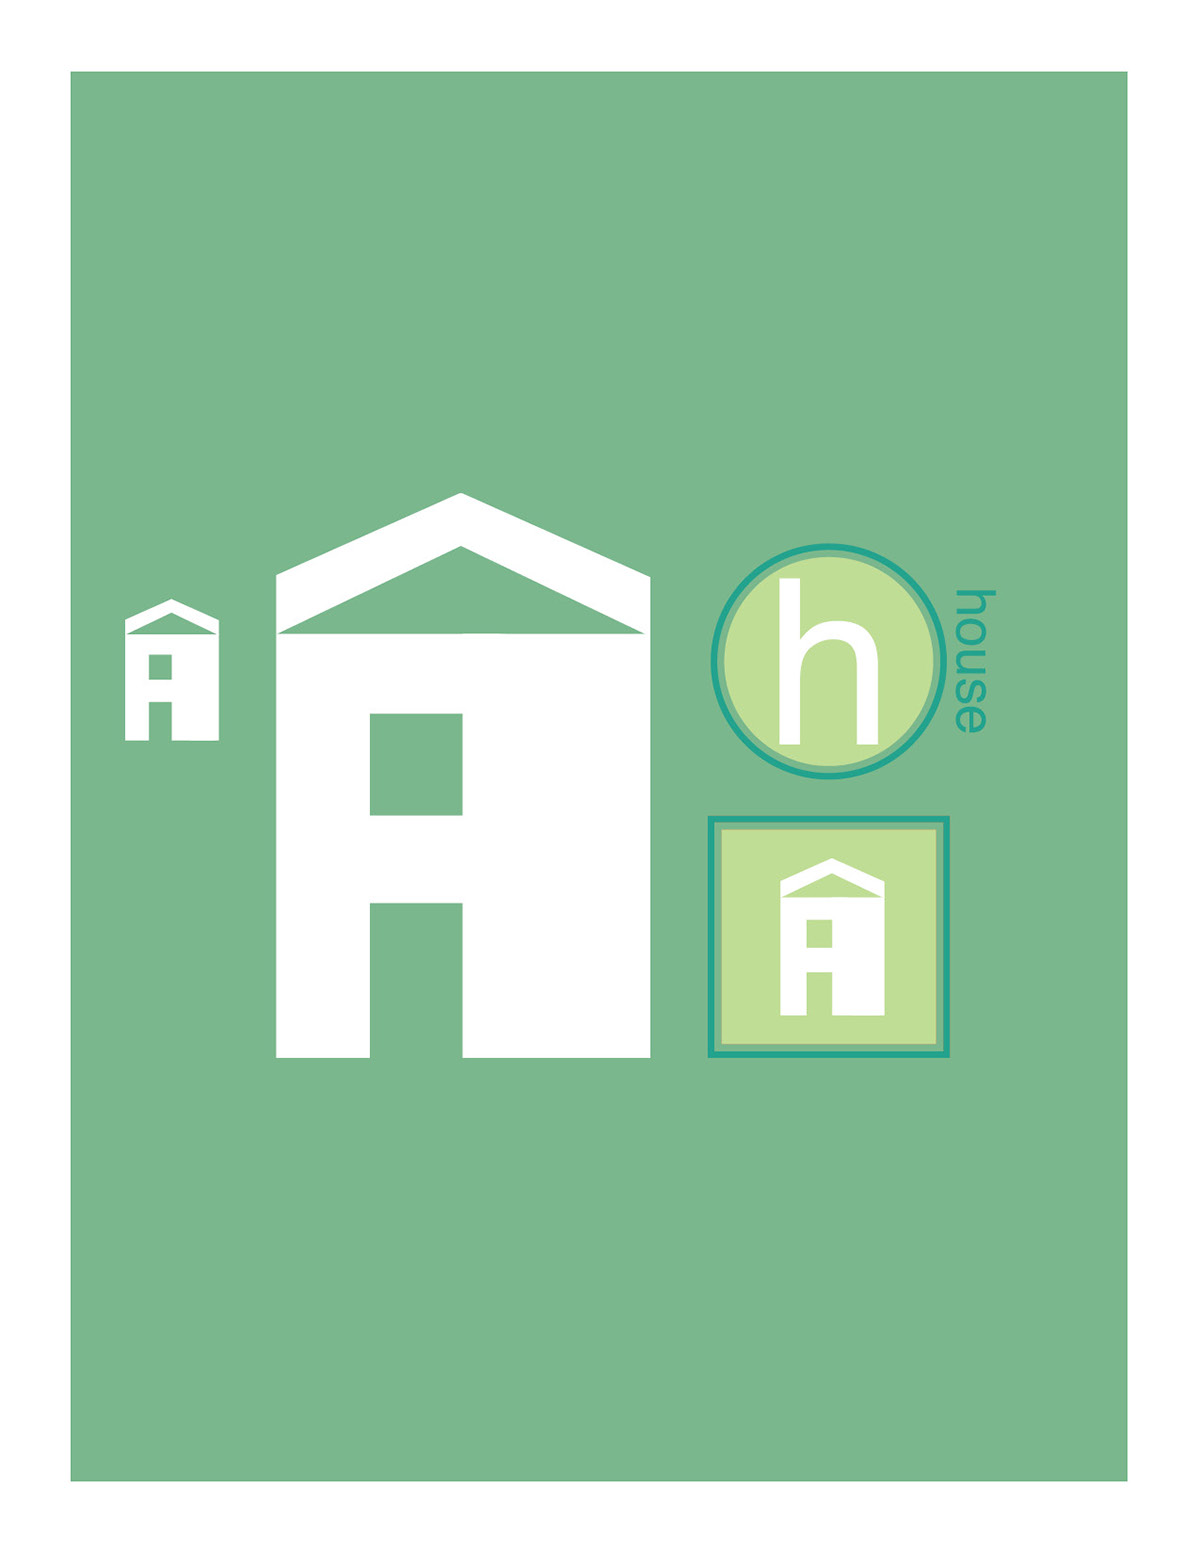 icons helvetica wayfinding family architecture ILLUSTRATION  building palette town city